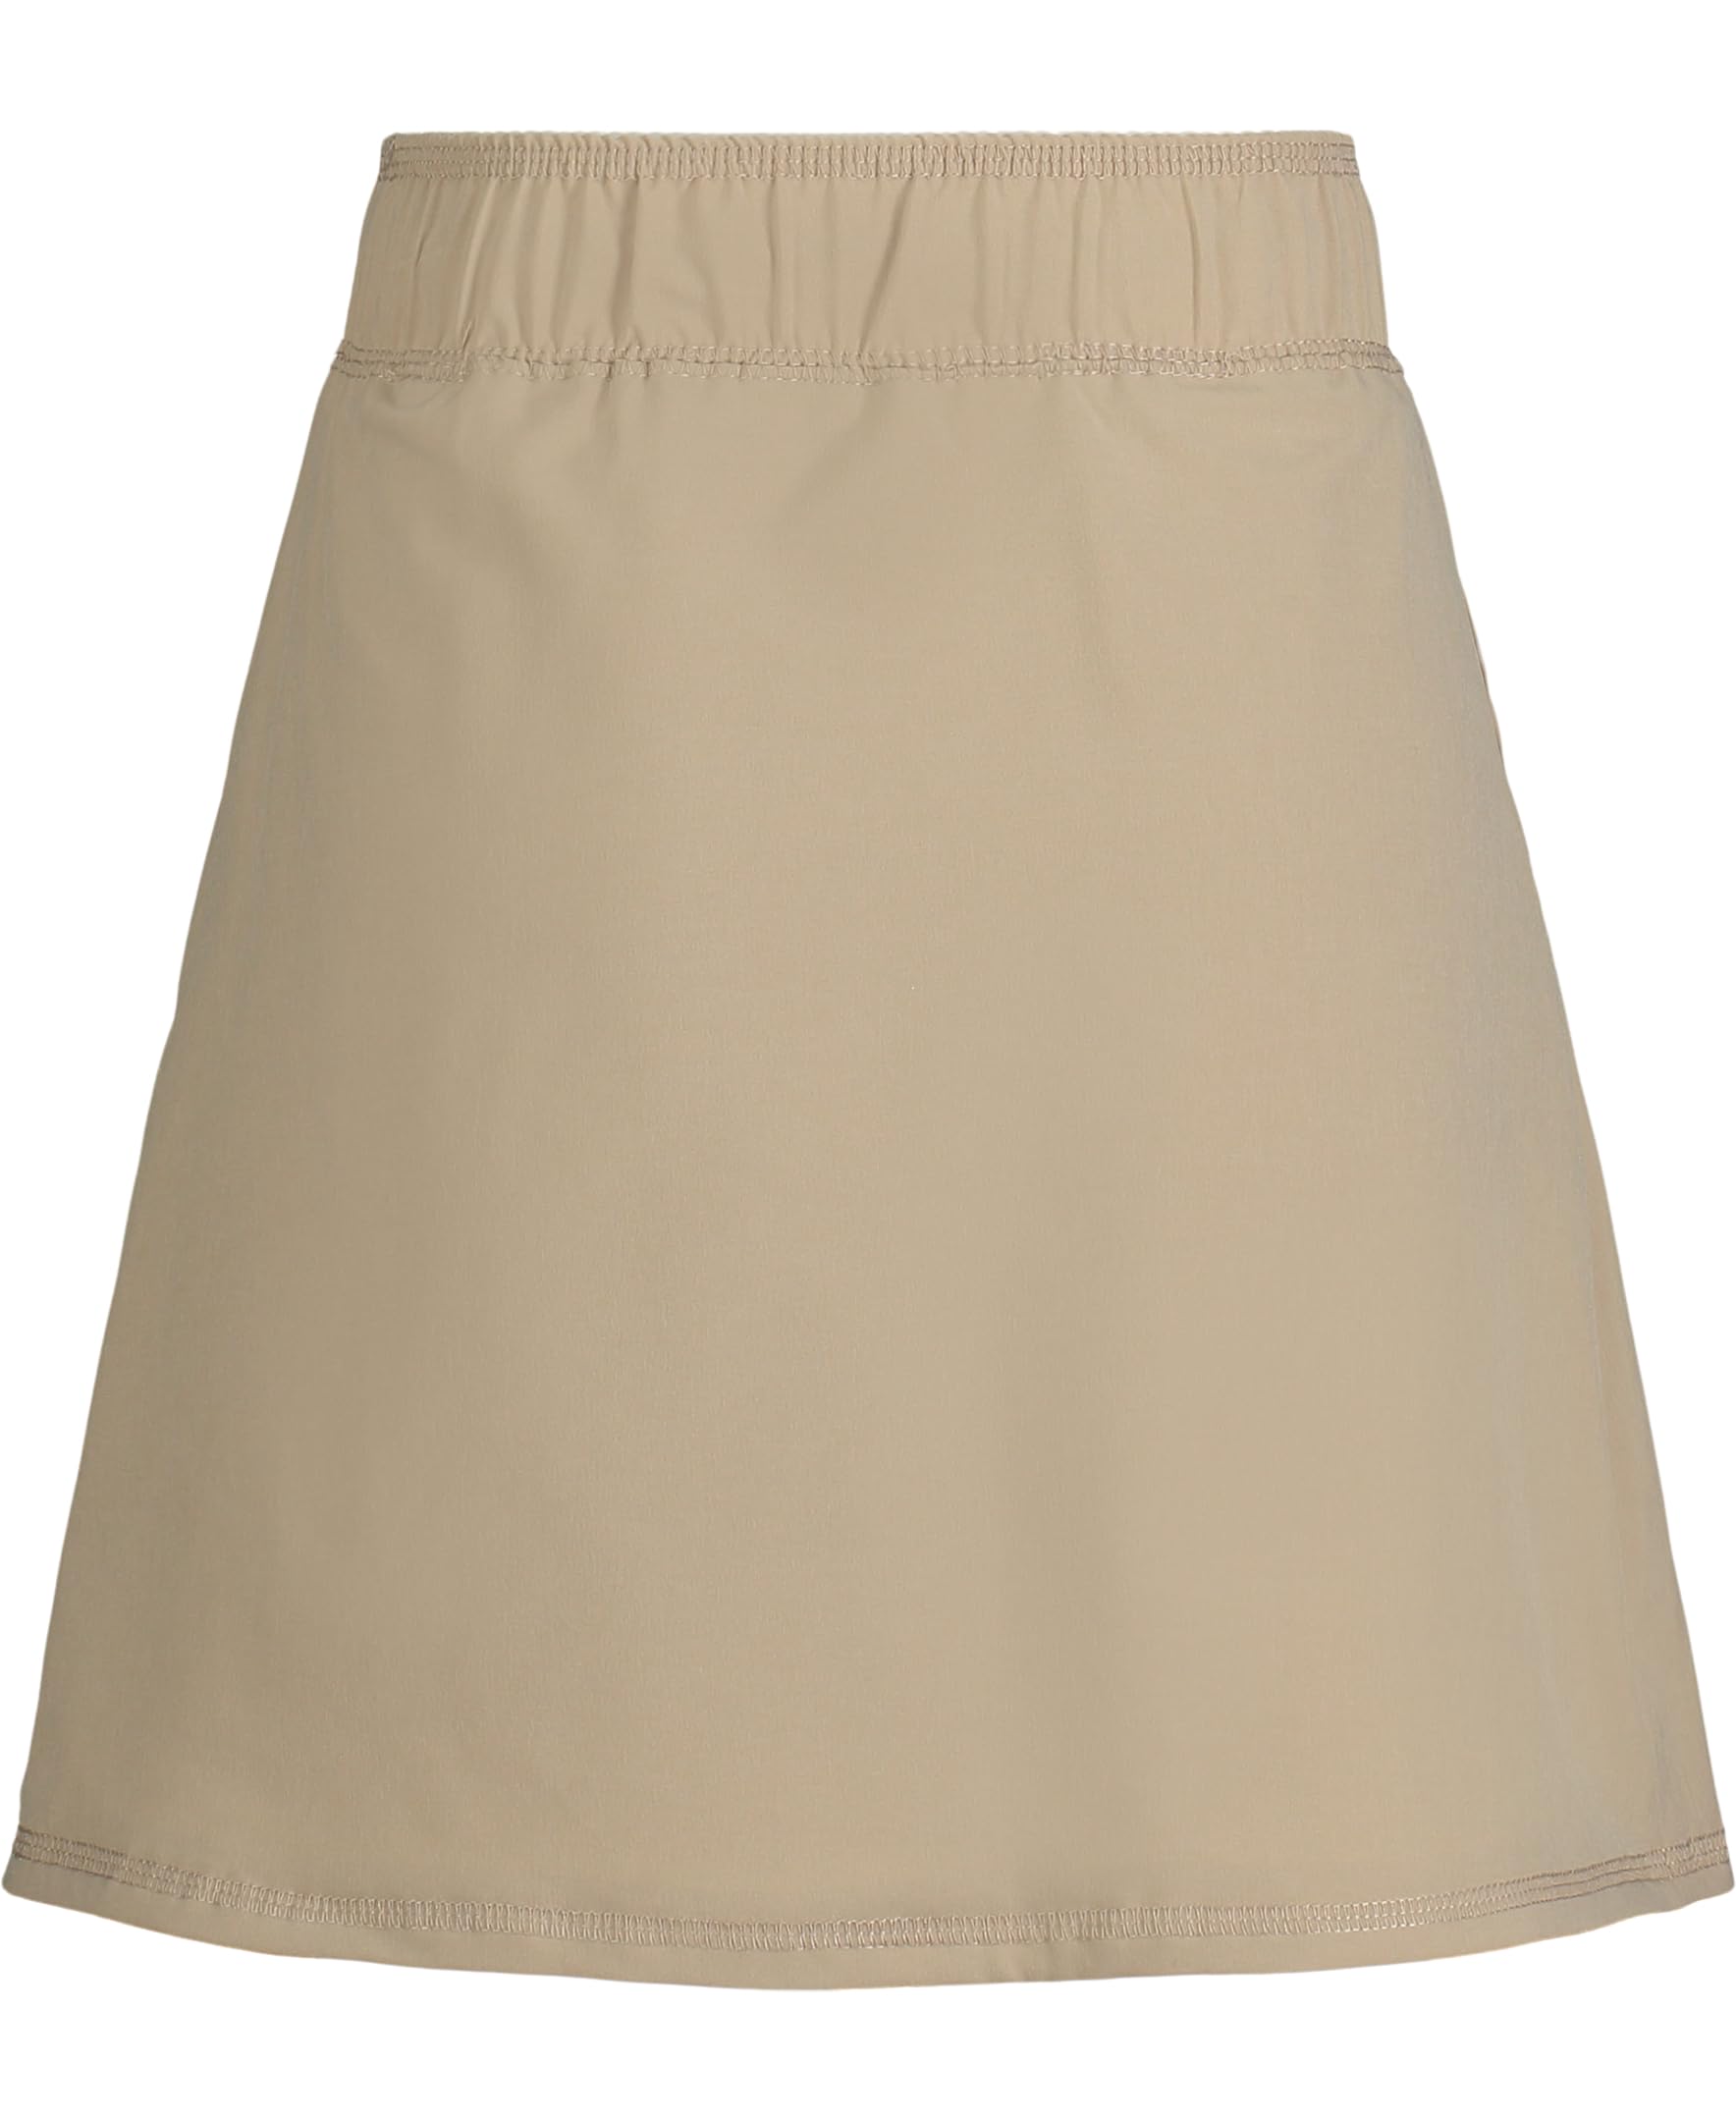 Nautica girls School Uniform Pull-on Scooter Skirt With Undershorts, Knit Waistband & Functional Pockets